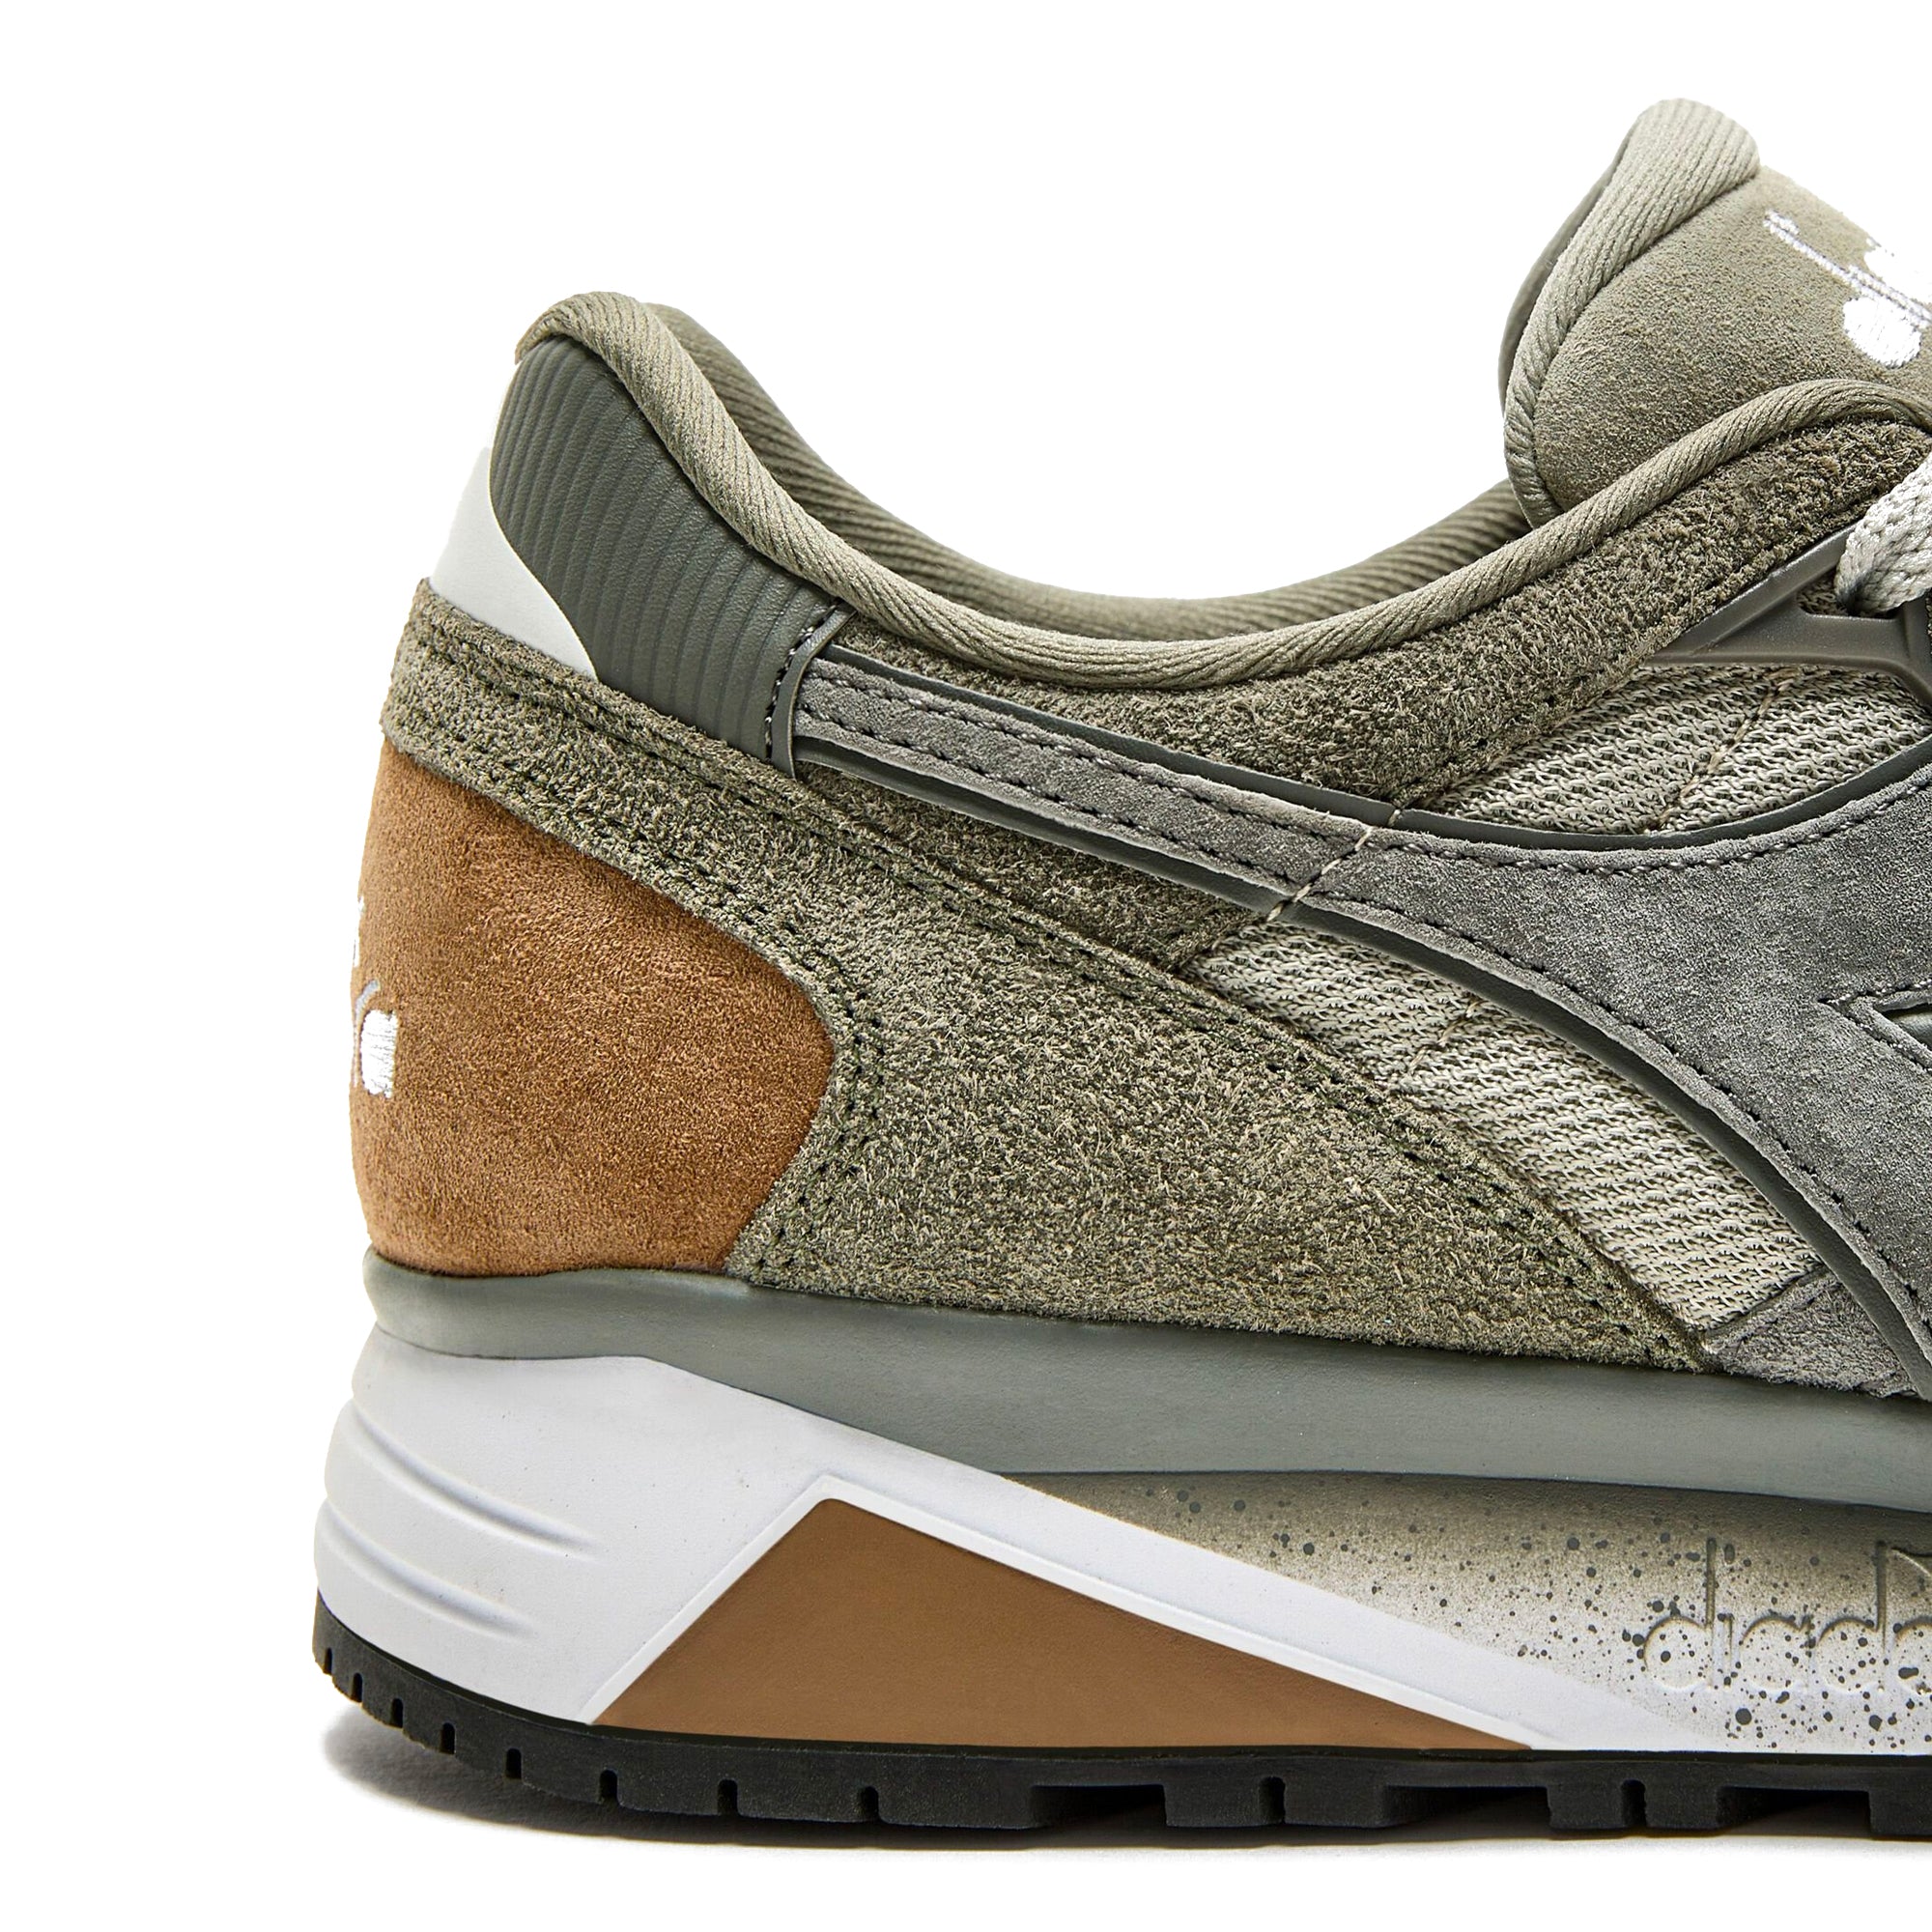 Diadora N9002 'Winter Pack' Trainers - Wild Dove / Grey Willow